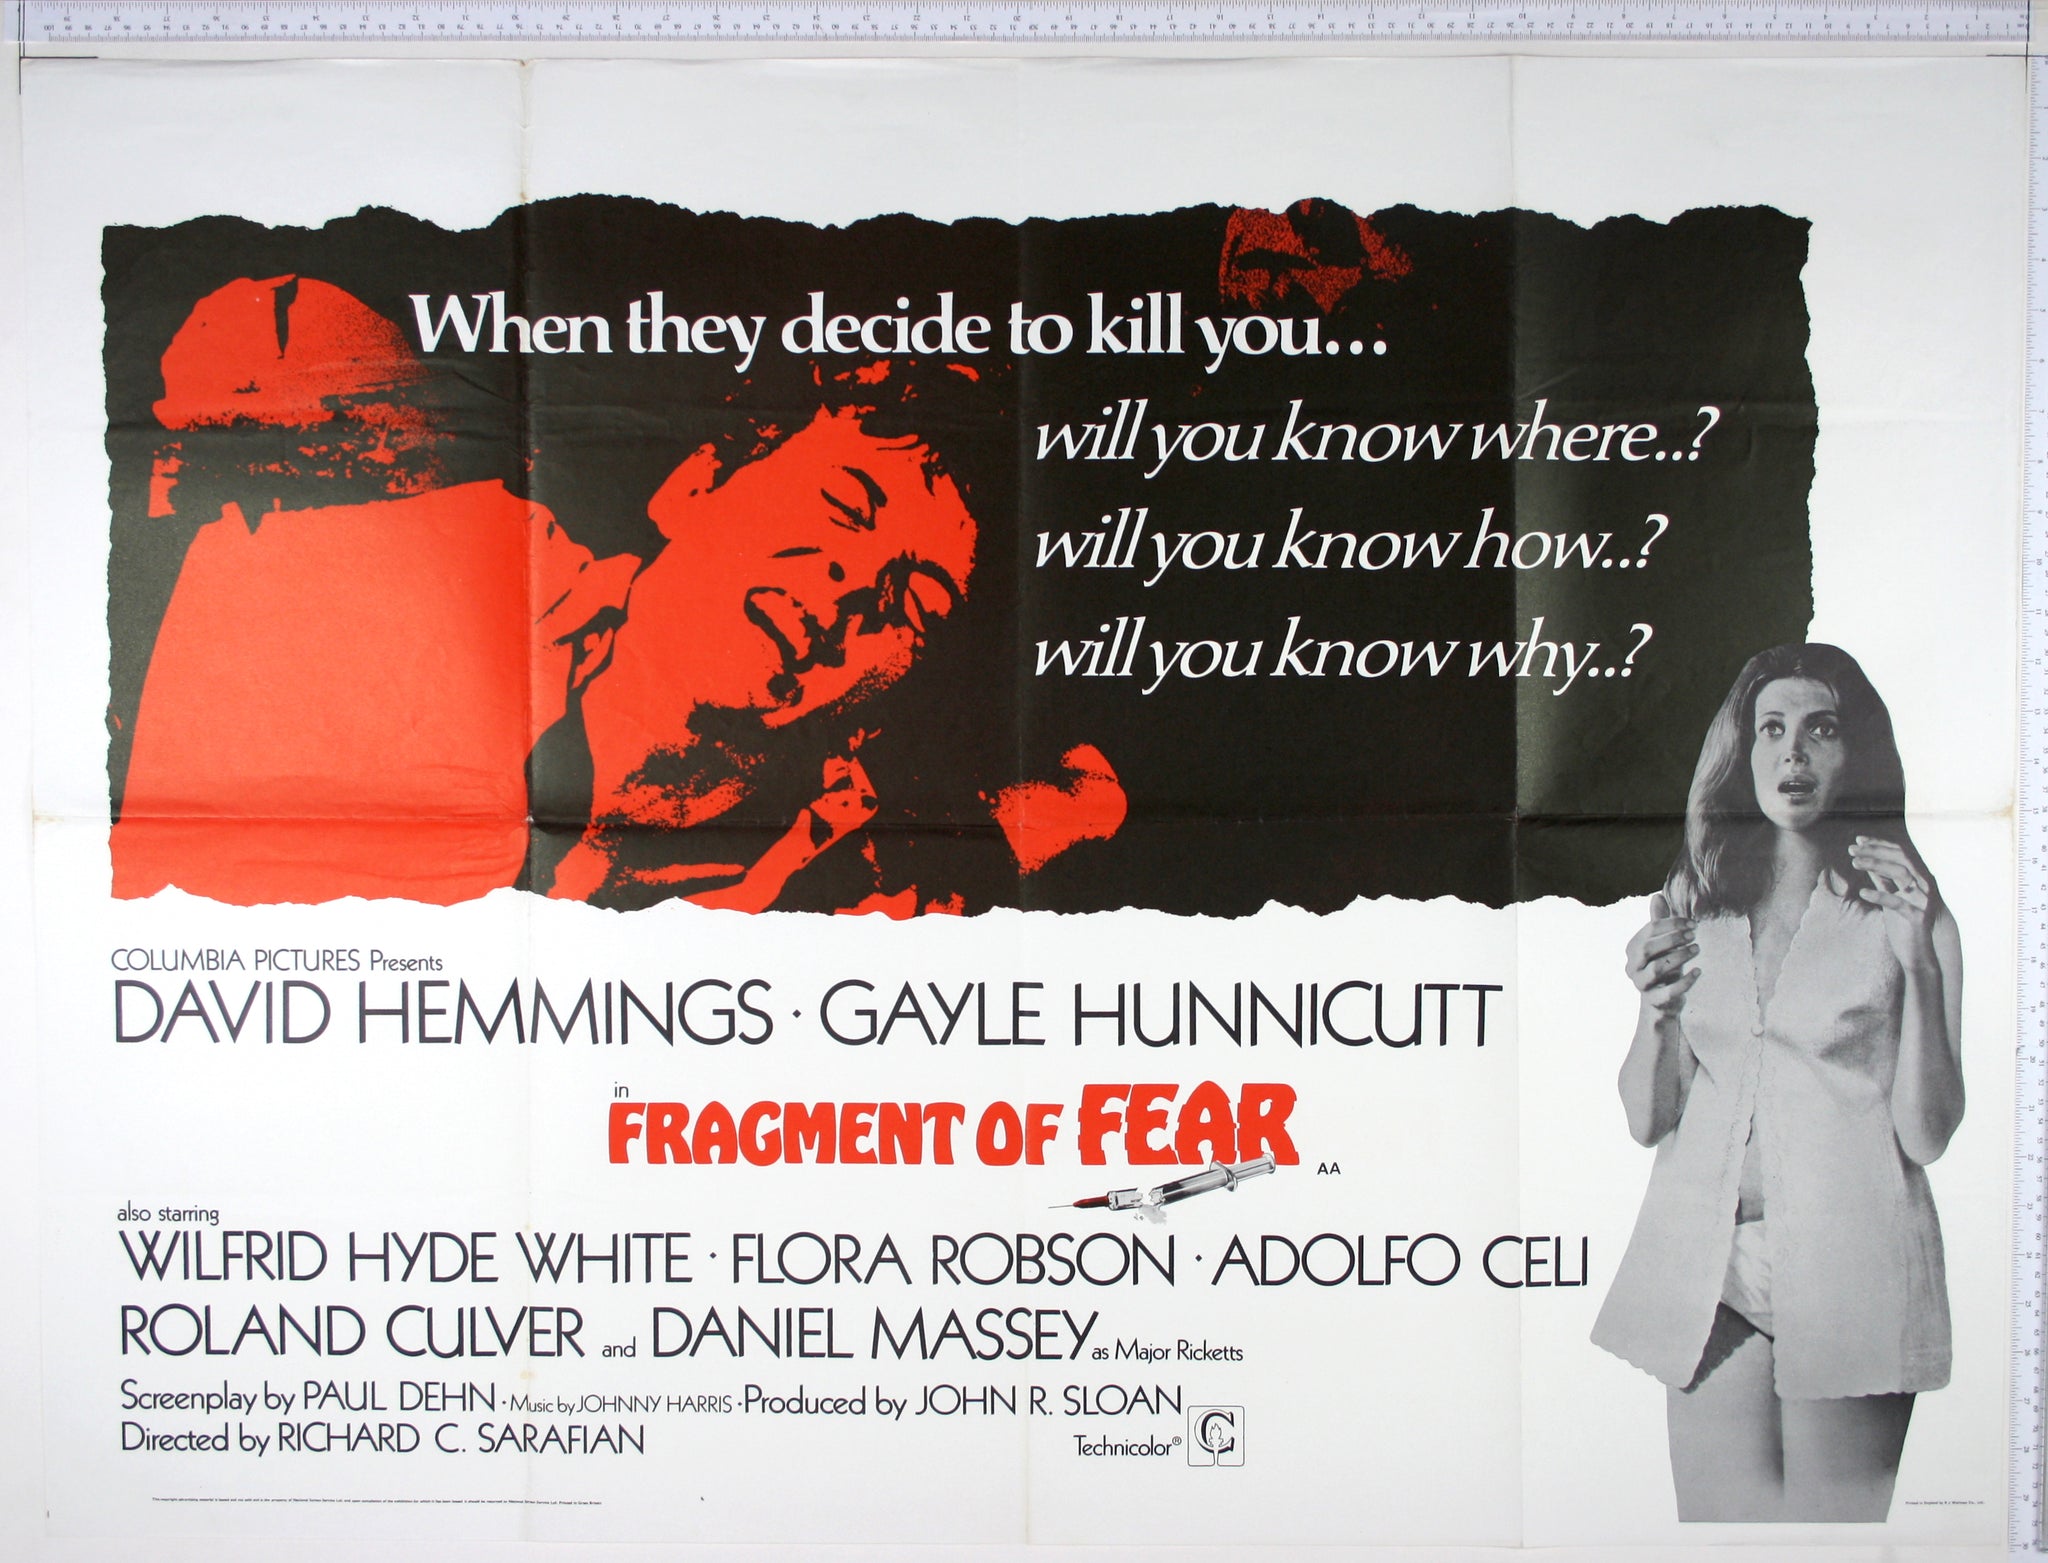 High contrast photo in red, of Hemmings grimacing, a b+w photo of horrified Hunnicutt. Below title is broken syringe.